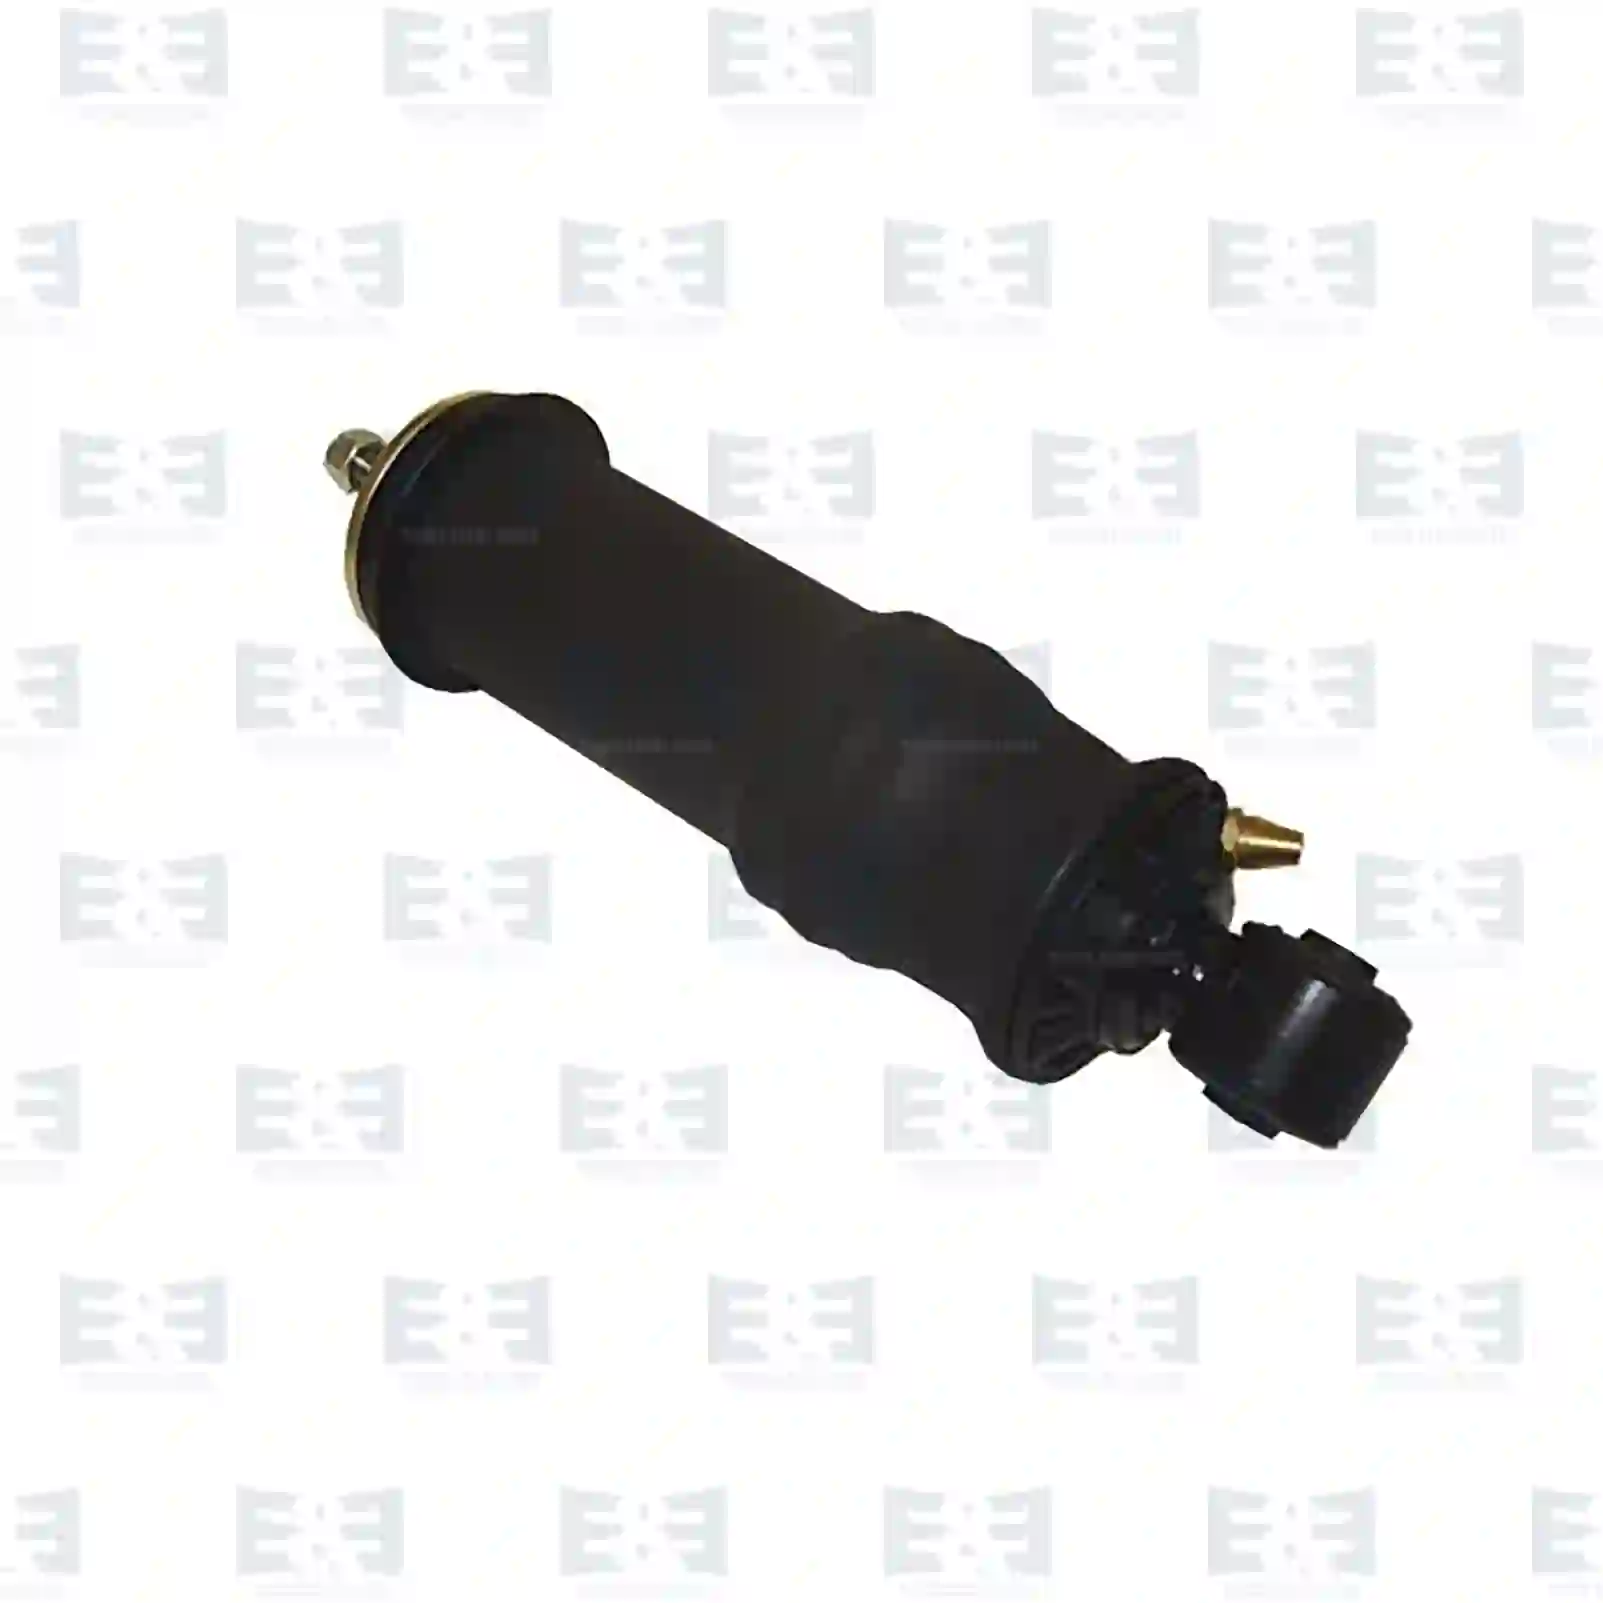 Cabin shock absorber, with air bellow, 2E2275141, 1505563S1, , , , , ||  2E2275141 E&E Truck Spare Parts | Truck Spare Parts, Auotomotive Spare Parts Cabin shock absorber, with air bellow, 2E2275141, 1505563S1, , , , , ||  2E2275141 E&E Truck Spare Parts | Truck Spare Parts, Auotomotive Spare Parts